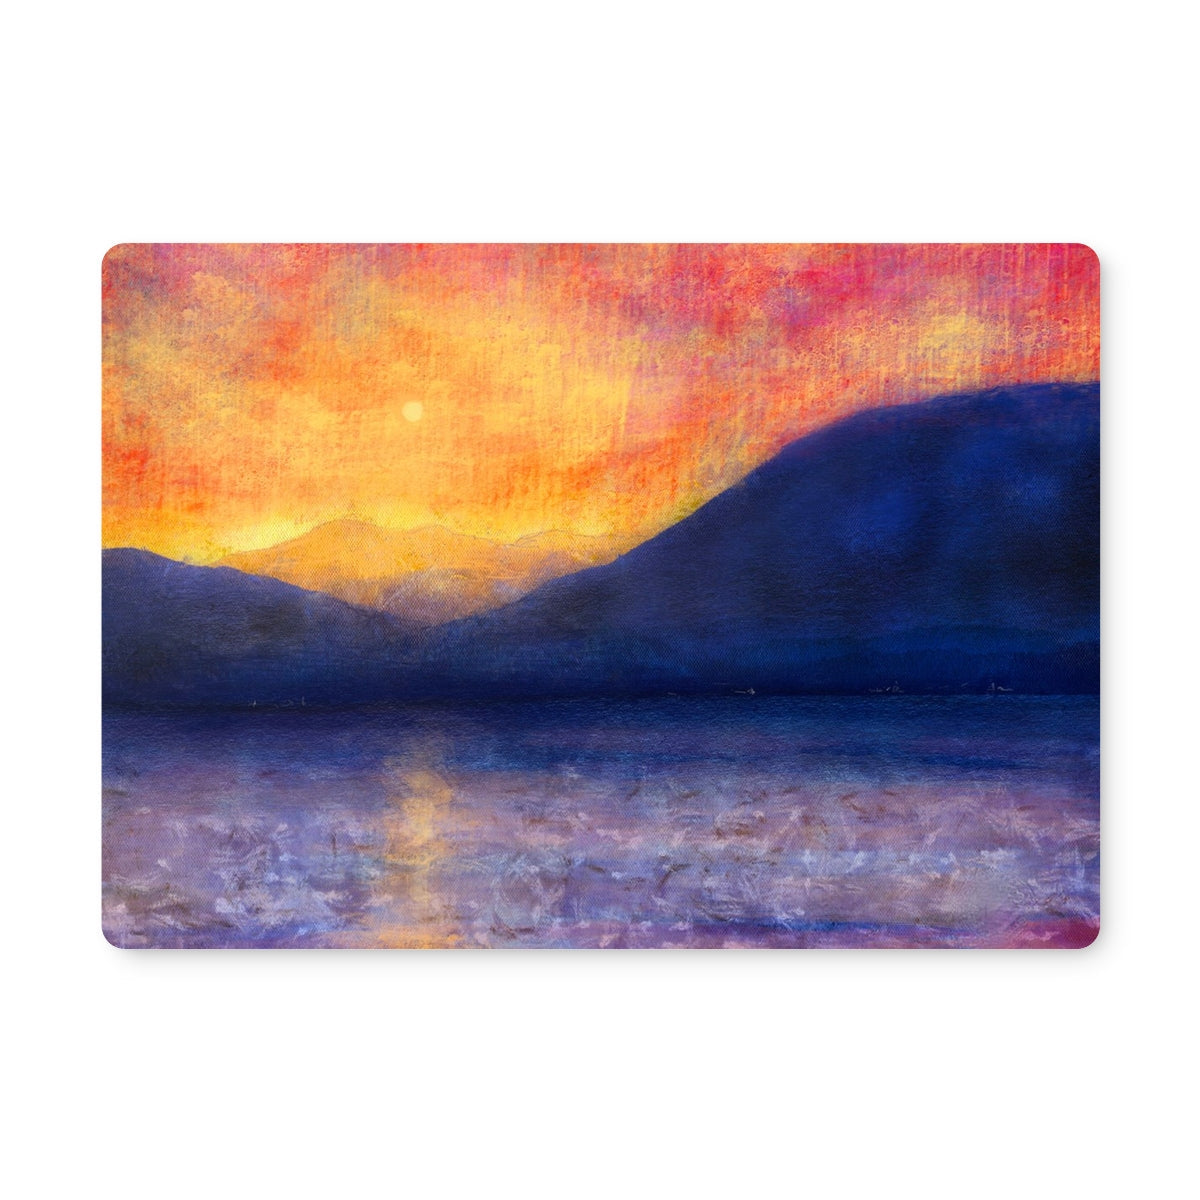 Sunset Approaching Mull Art Gifts Placemat-Placemats-Hebridean Islands Art Gallery-6 Placemats-Paintings, Prints, Homeware, Art Gifts From Scotland By Scottish Artist Kevin Hunter